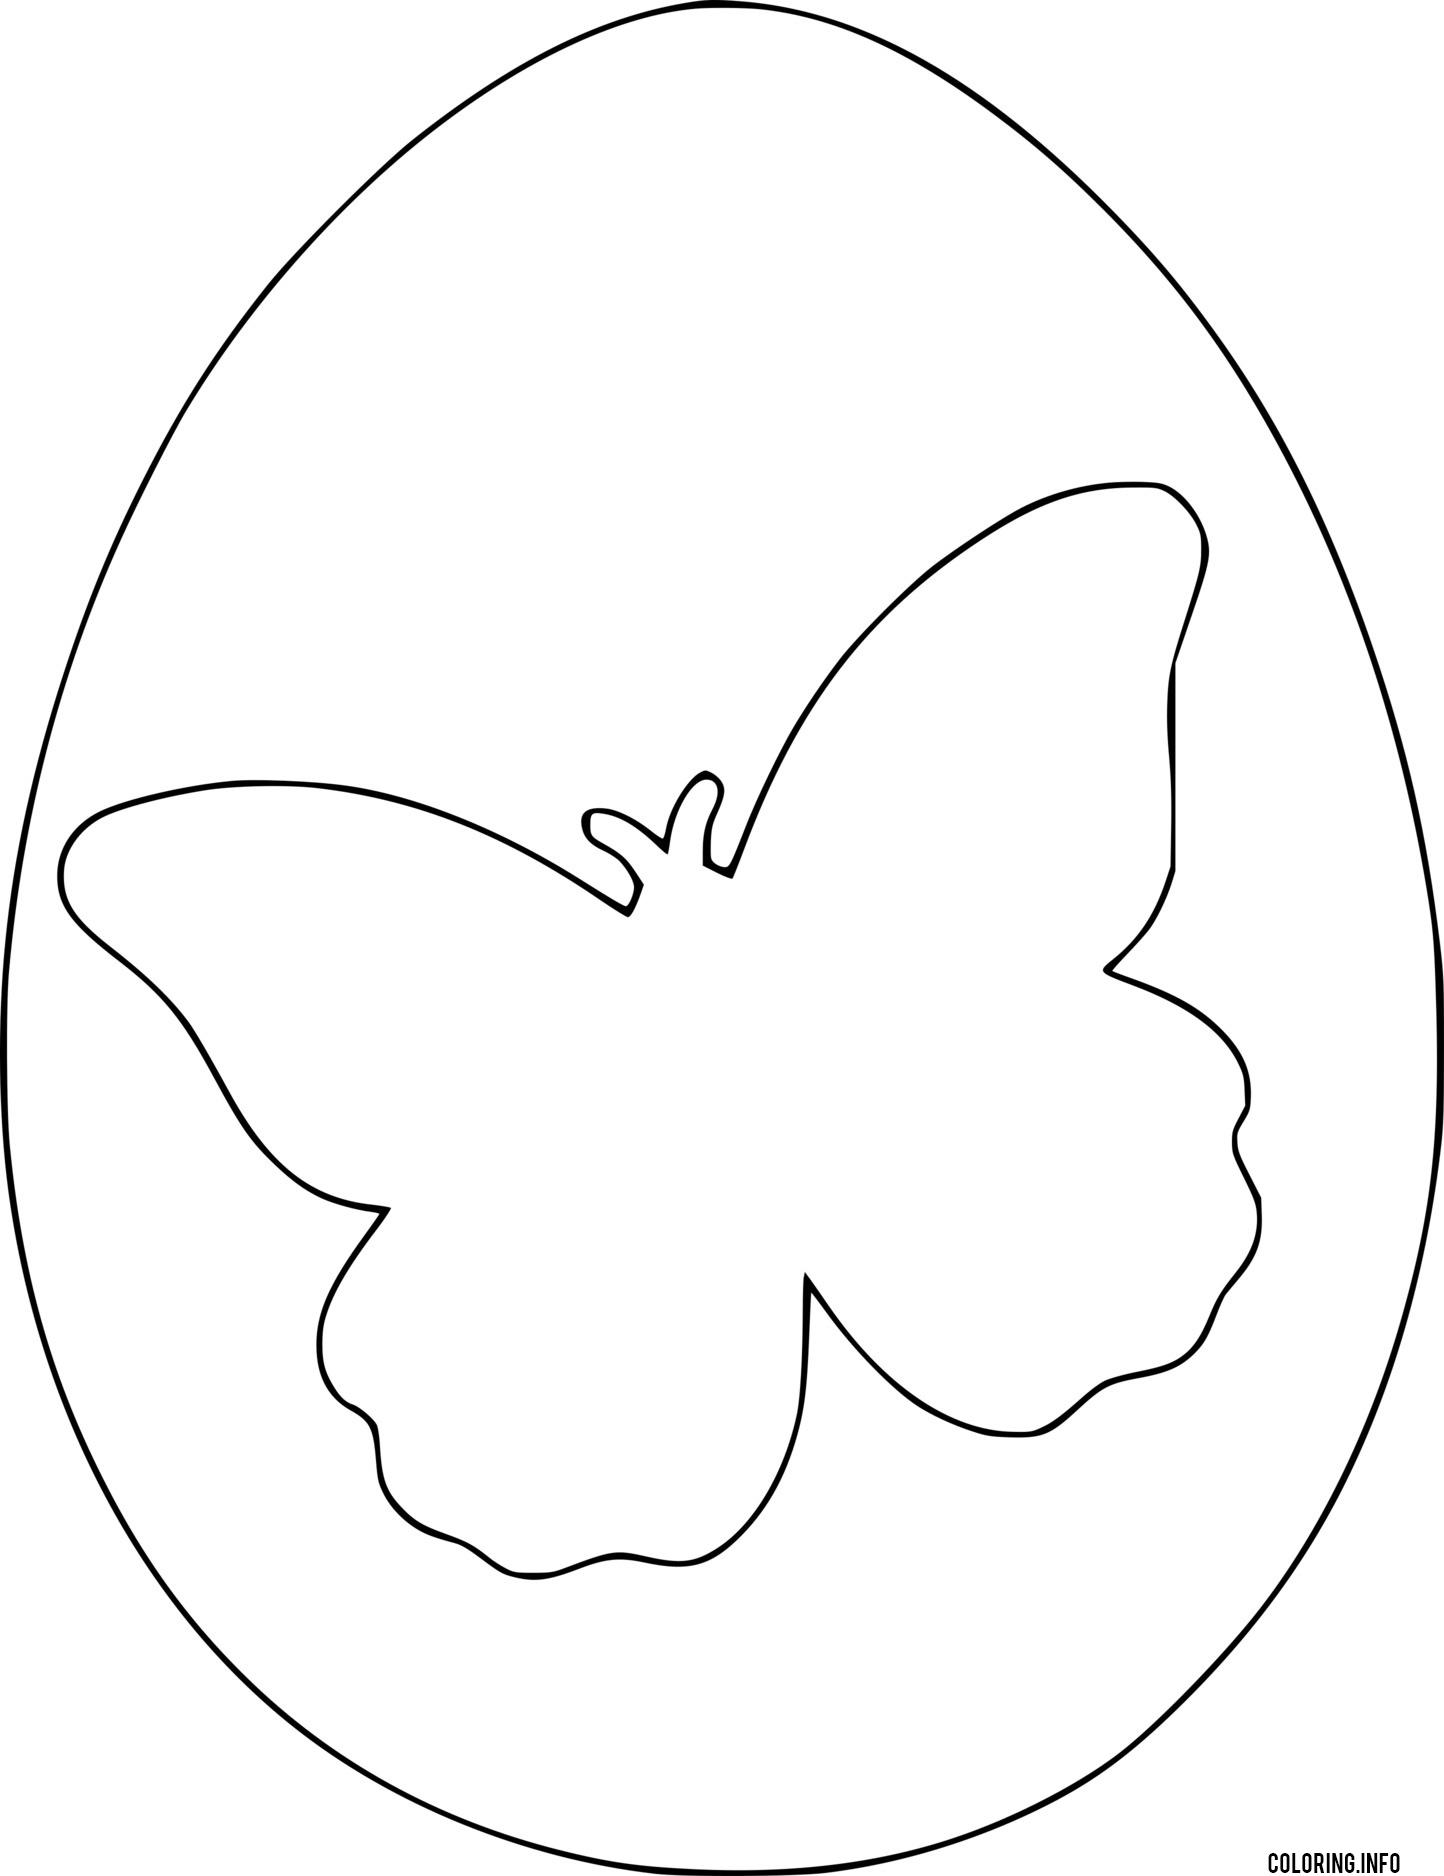 Blank Easter Egg With A Butterfly coloring